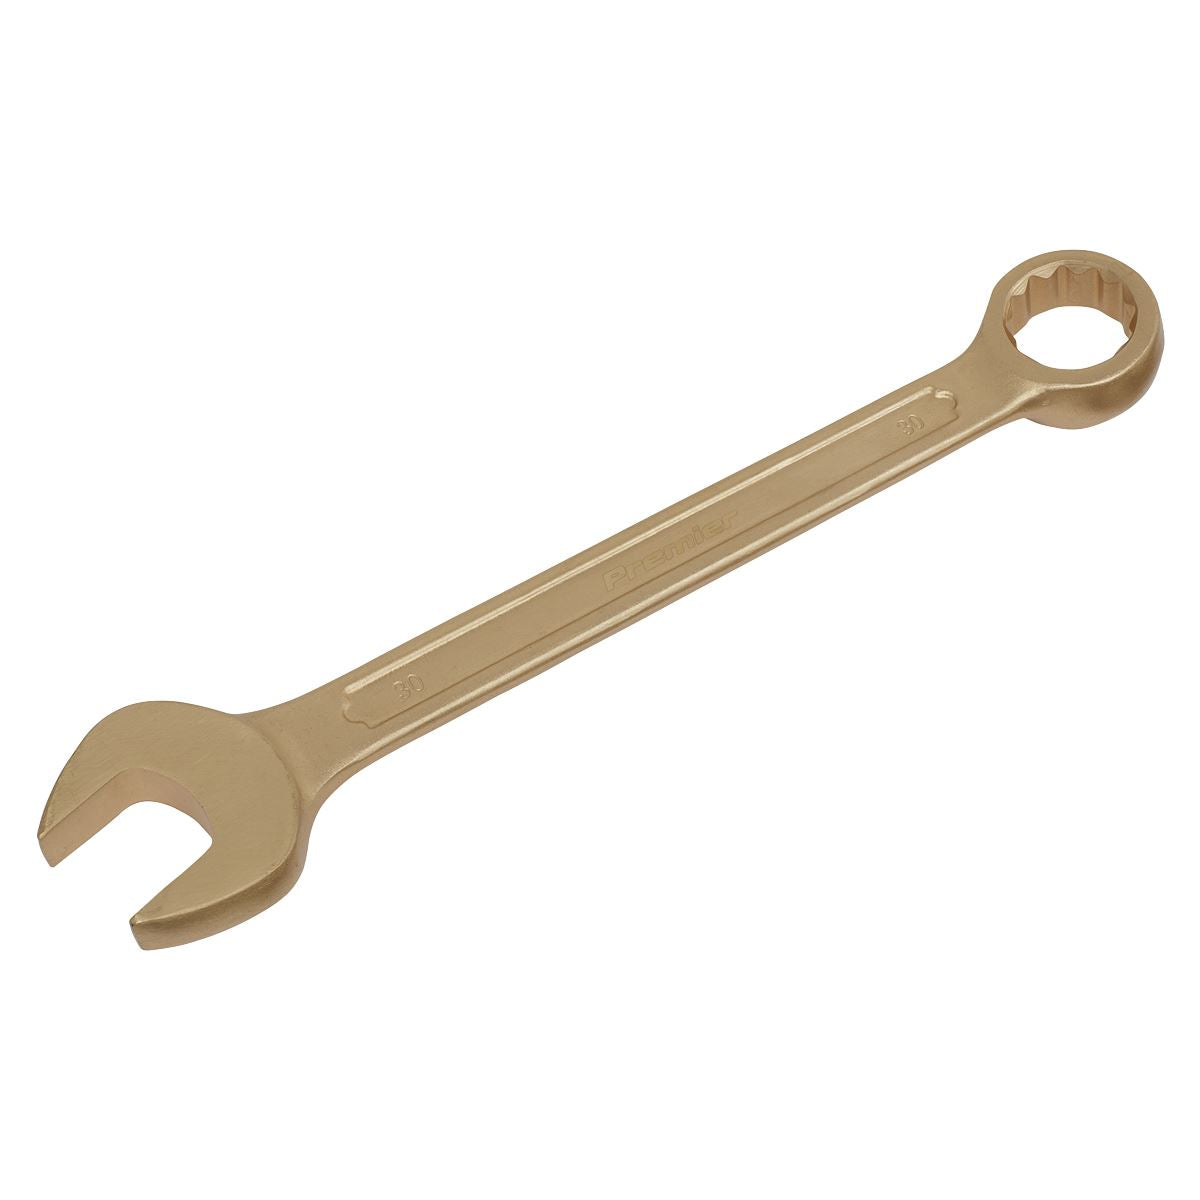 Sealey Premier Combination Spanner 30mm - Non-Sparking